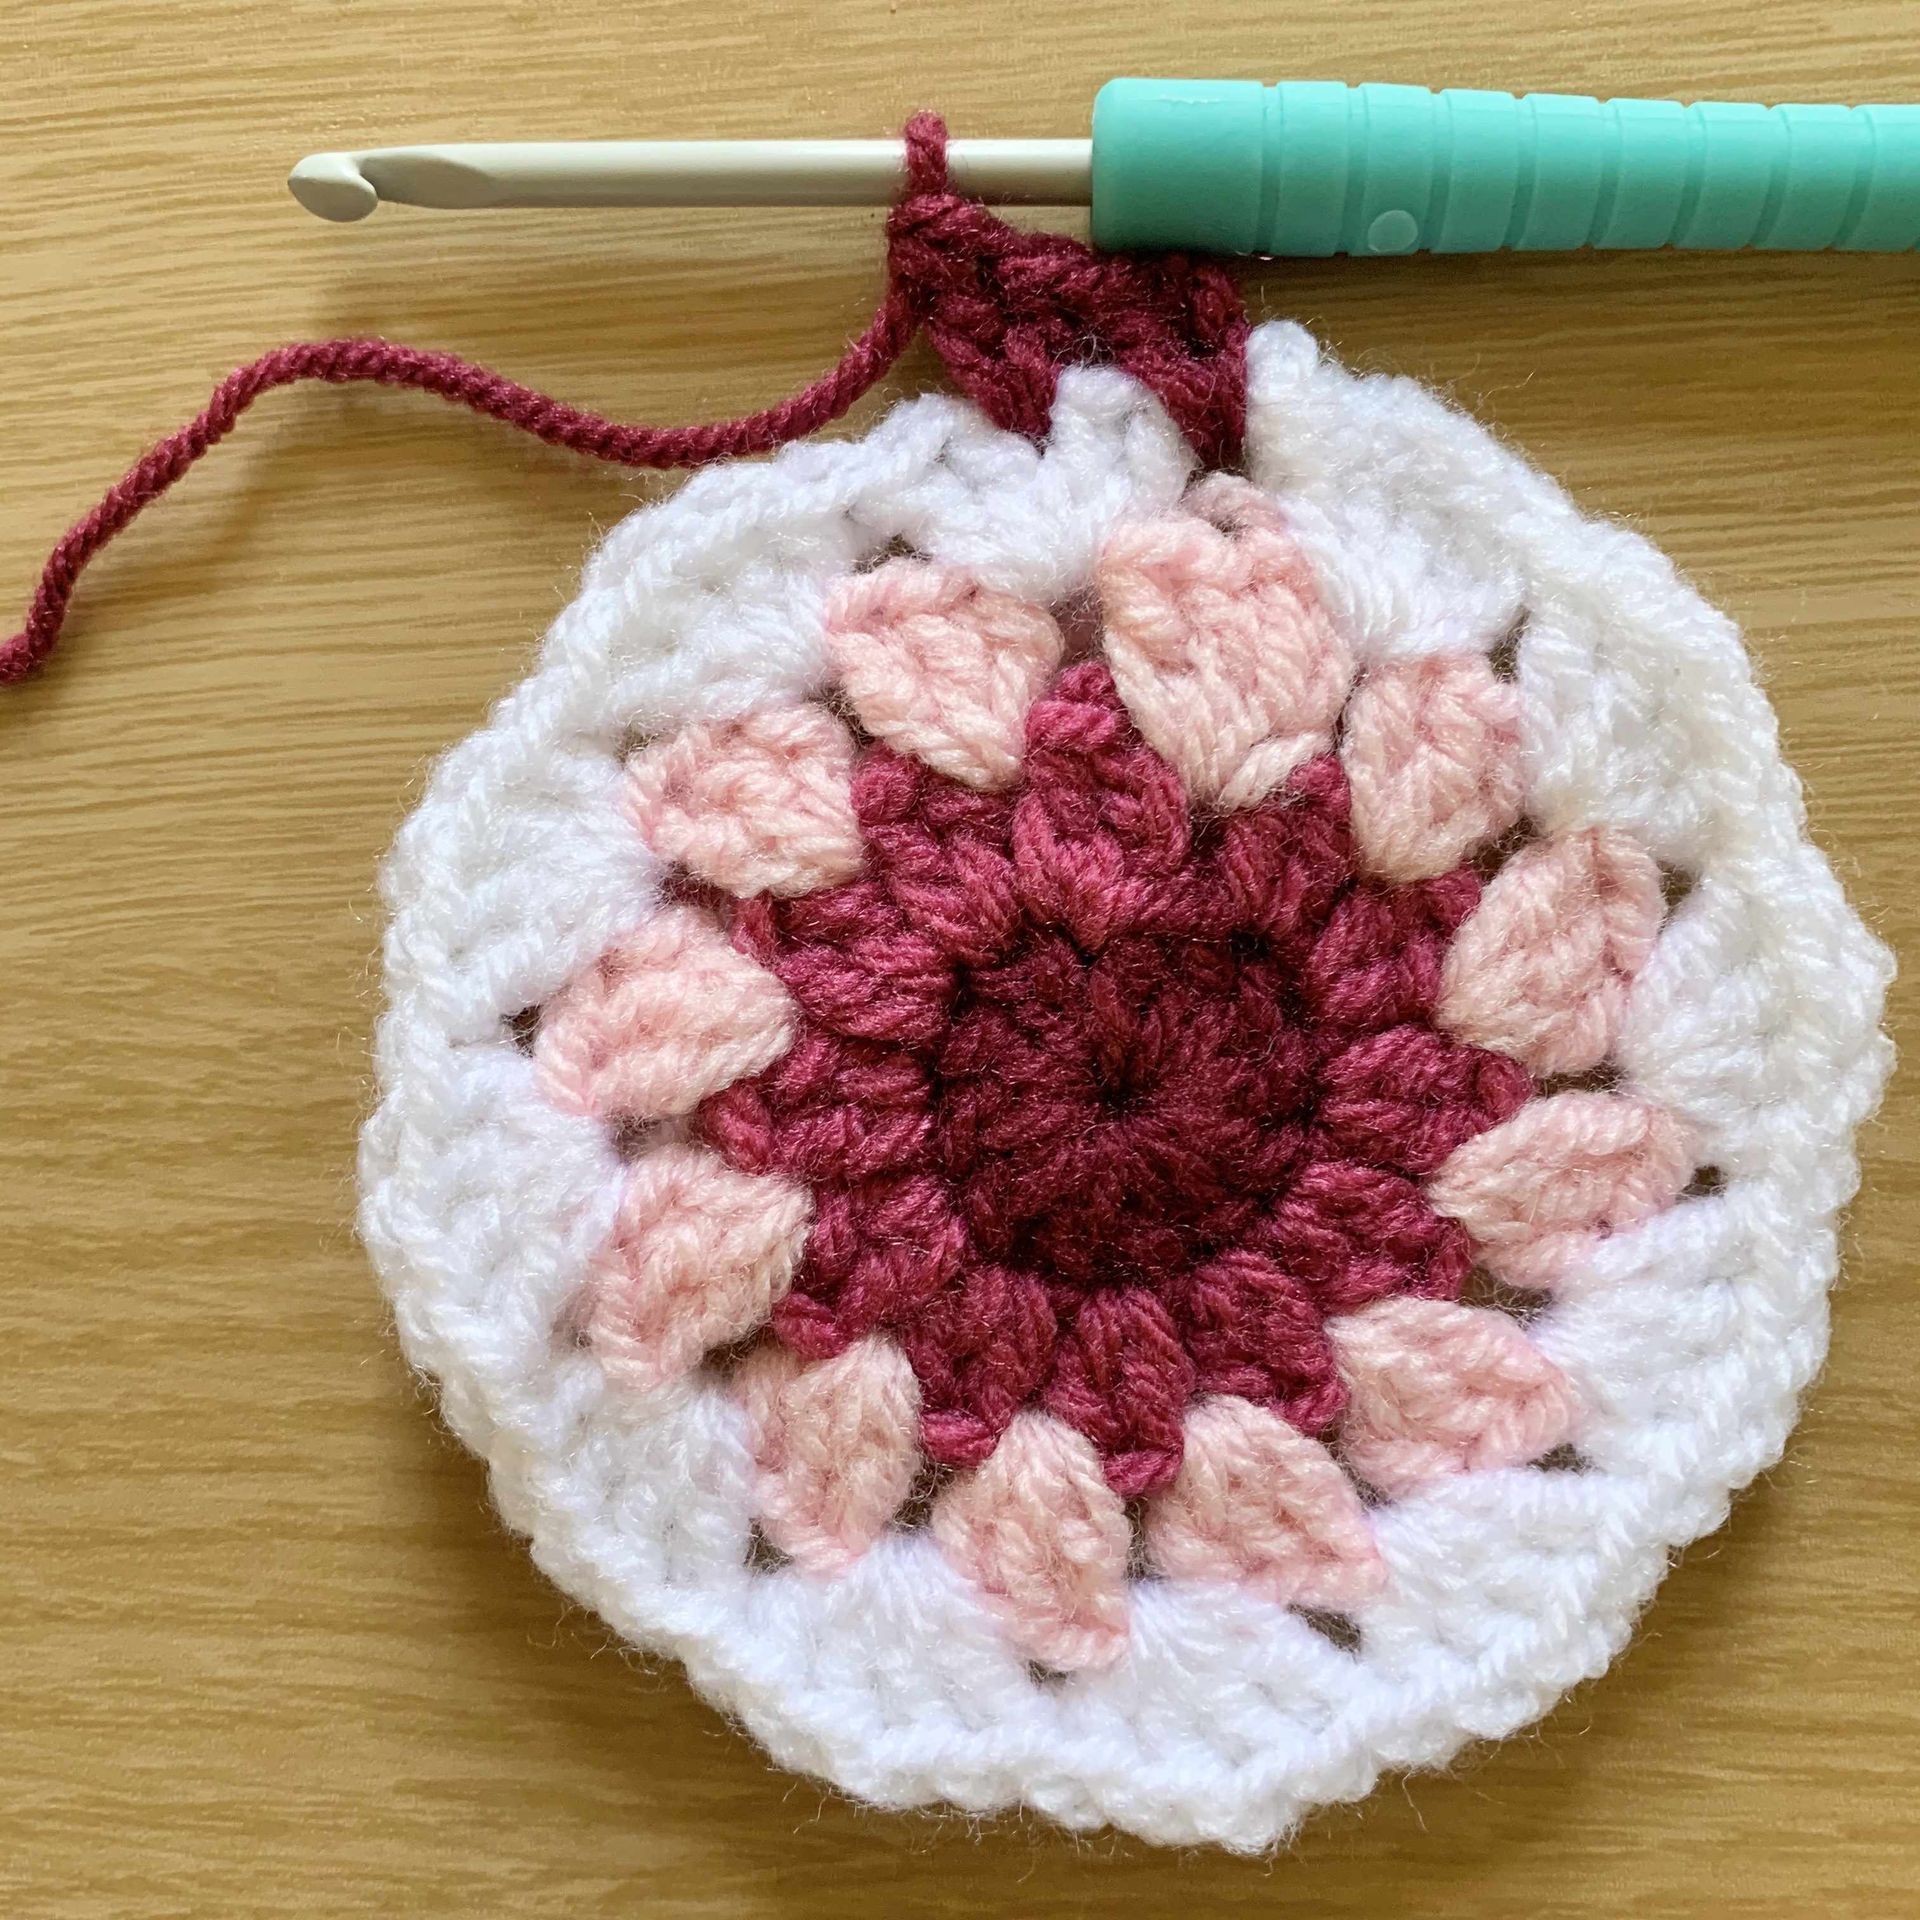 How to crochet a tea cosy free pattern